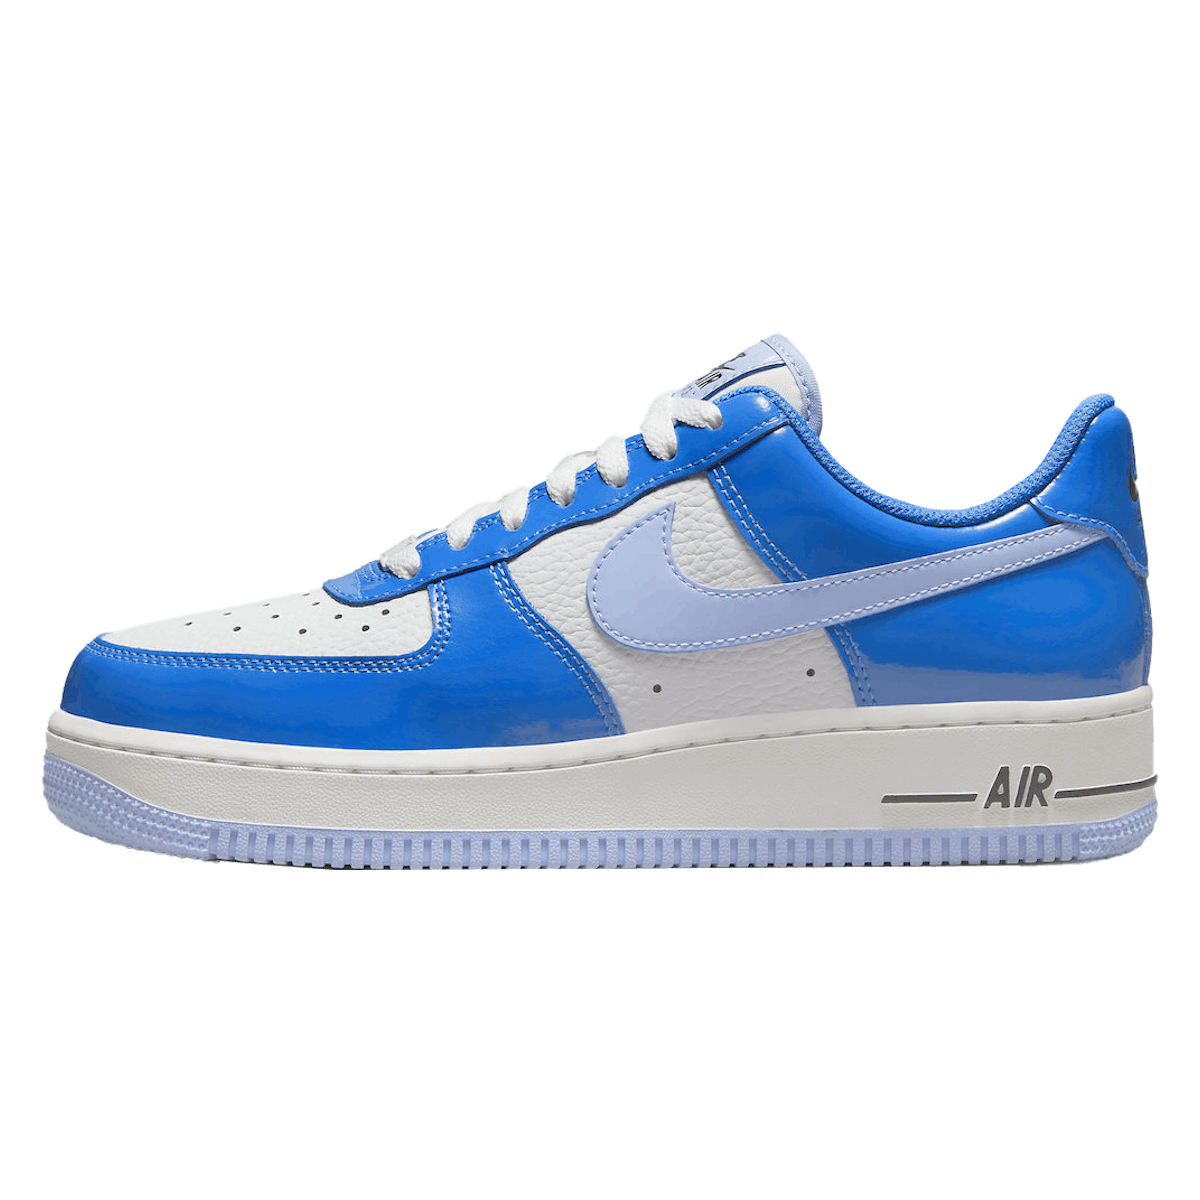 Nike Air Force 1 Low "Blue Patent"